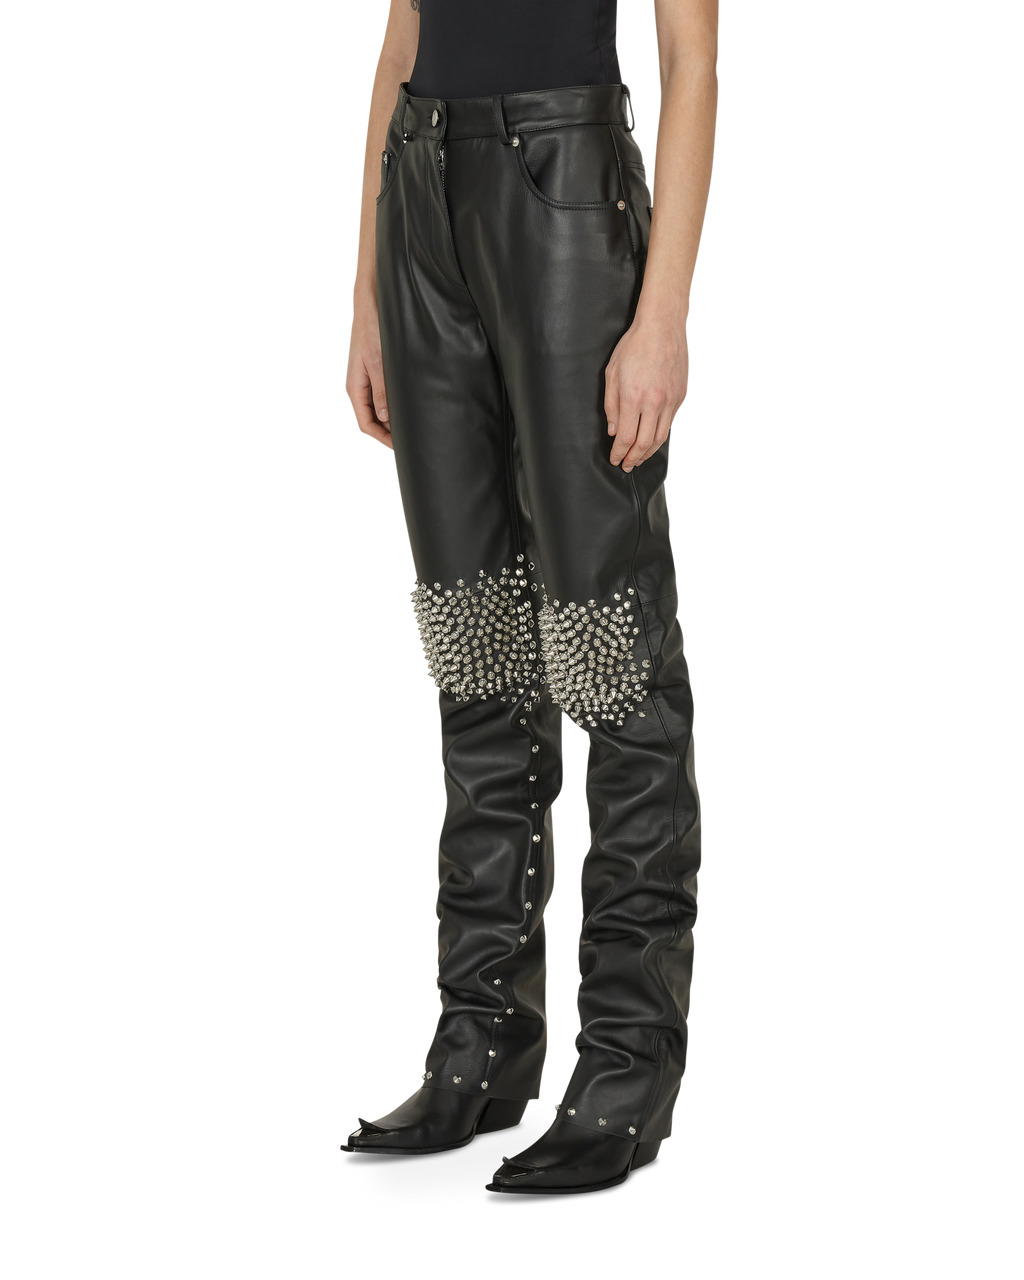 STUDDED LEATHER PANT - 3